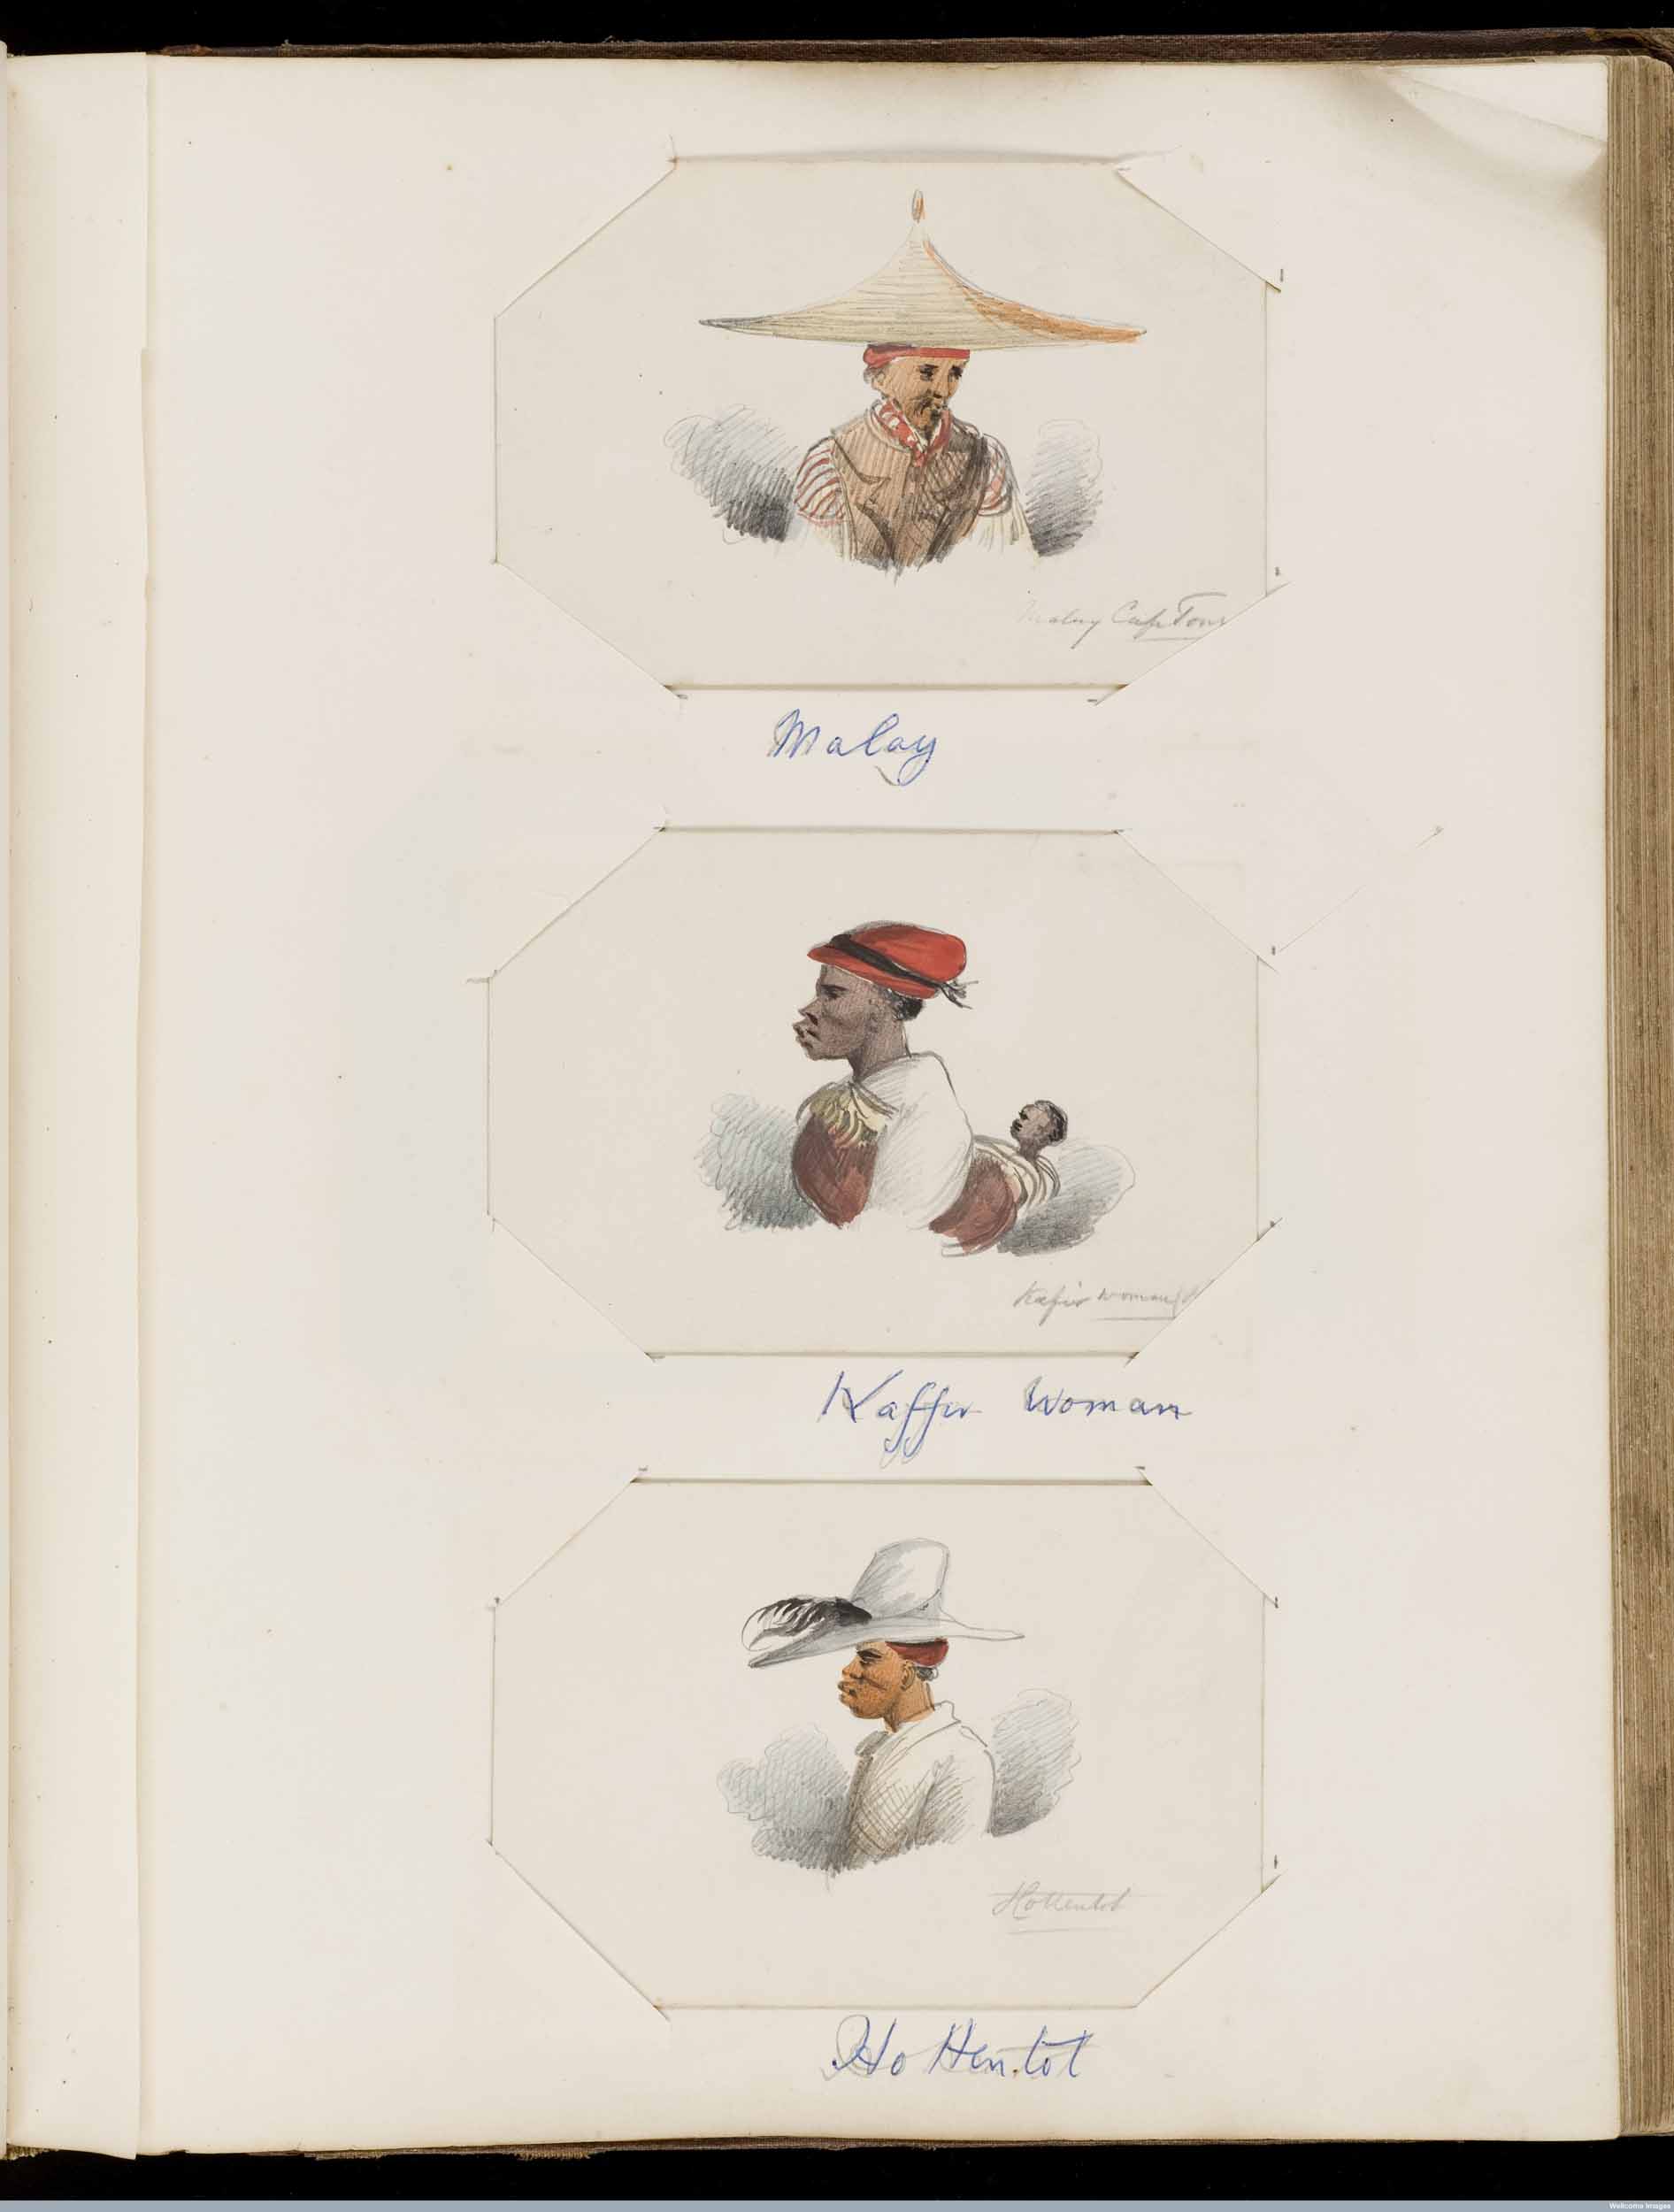 3 x water colour sketches: 'Malay', 'Kaffir Woman', 'Hottentot', c. 1867. From the RAMC Muniment Collection. Copyright Wellcome Library, London. Creative Commons Attribution 4.0 International (https://creativecommons.org/licenses/by/4.0/).